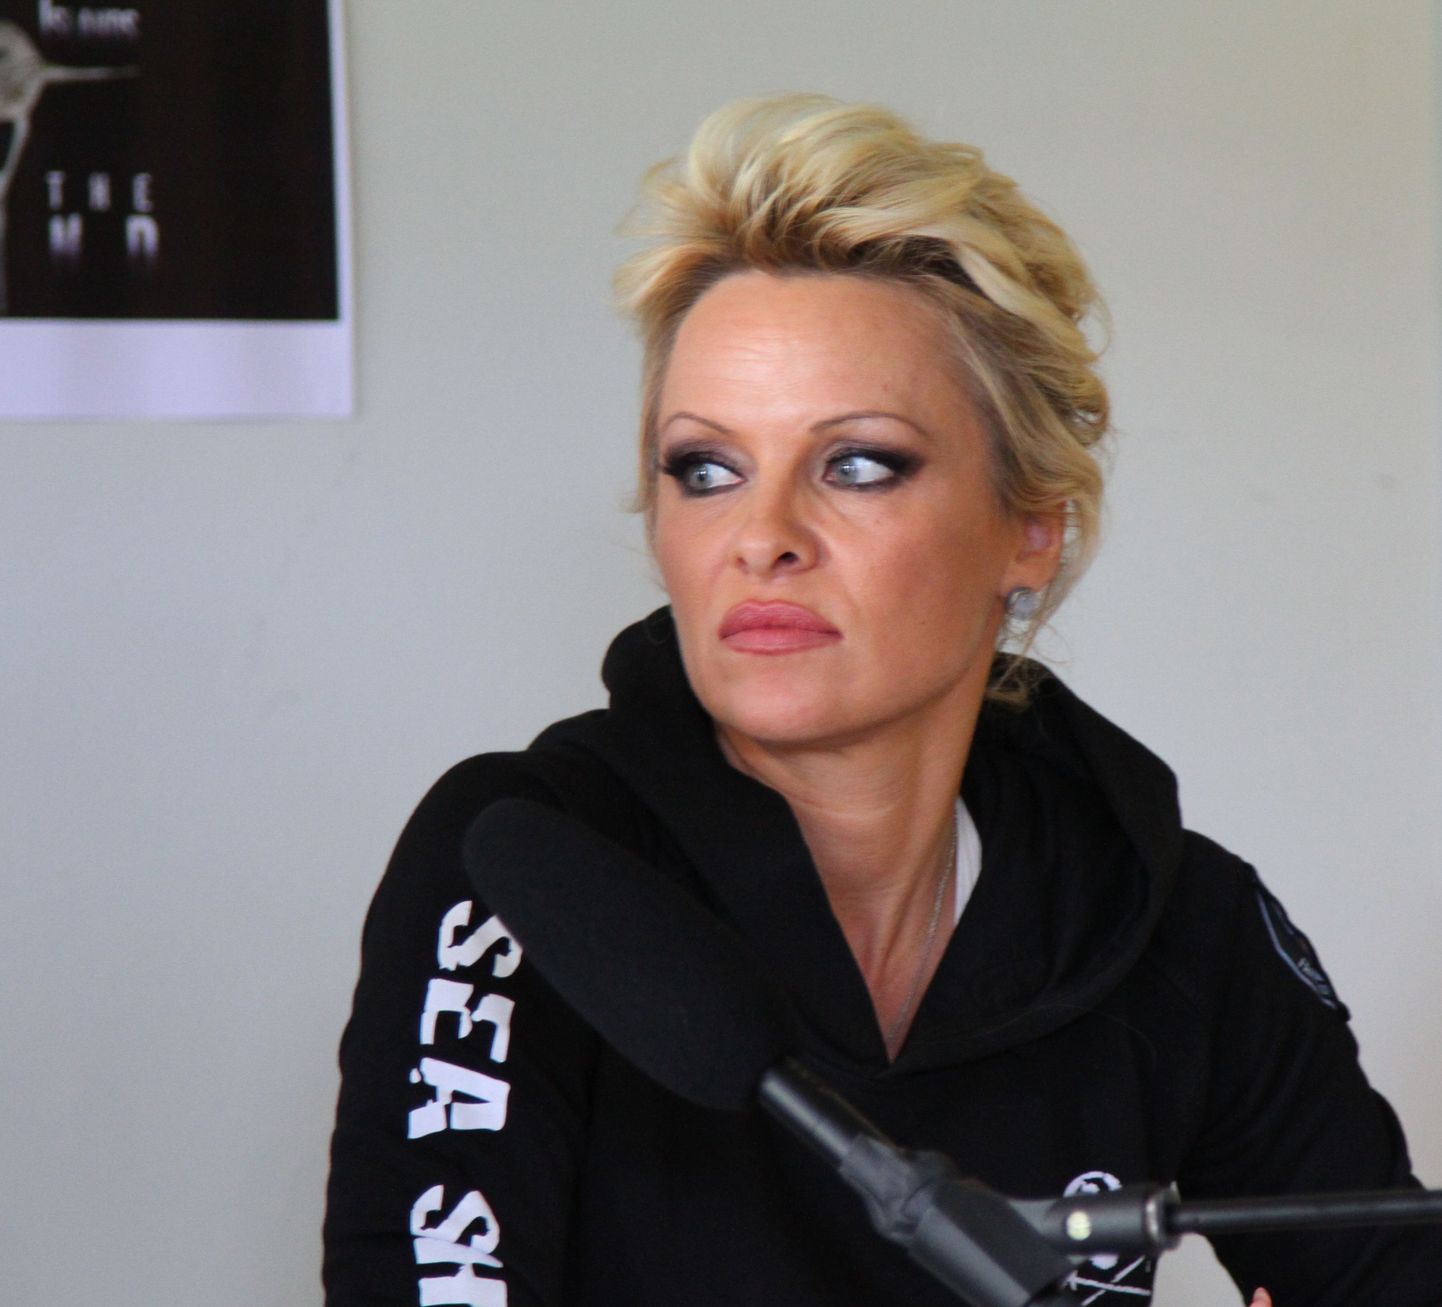 Actress and animal rights activist Pamela Anderson holds a press conference in Torshavn at the Faeroe Islands on Friday, Aug.1, 2014. She traveled to the islands to support a campaign by Seattle-based Sea Shepherd Conservation Society opposing the drives of pilot whales that date from the late 16th century. (AP Photo/POLFOTO, Sigmar Morkore, Sosialurin)  DENMARK OUT / TT / kod 436